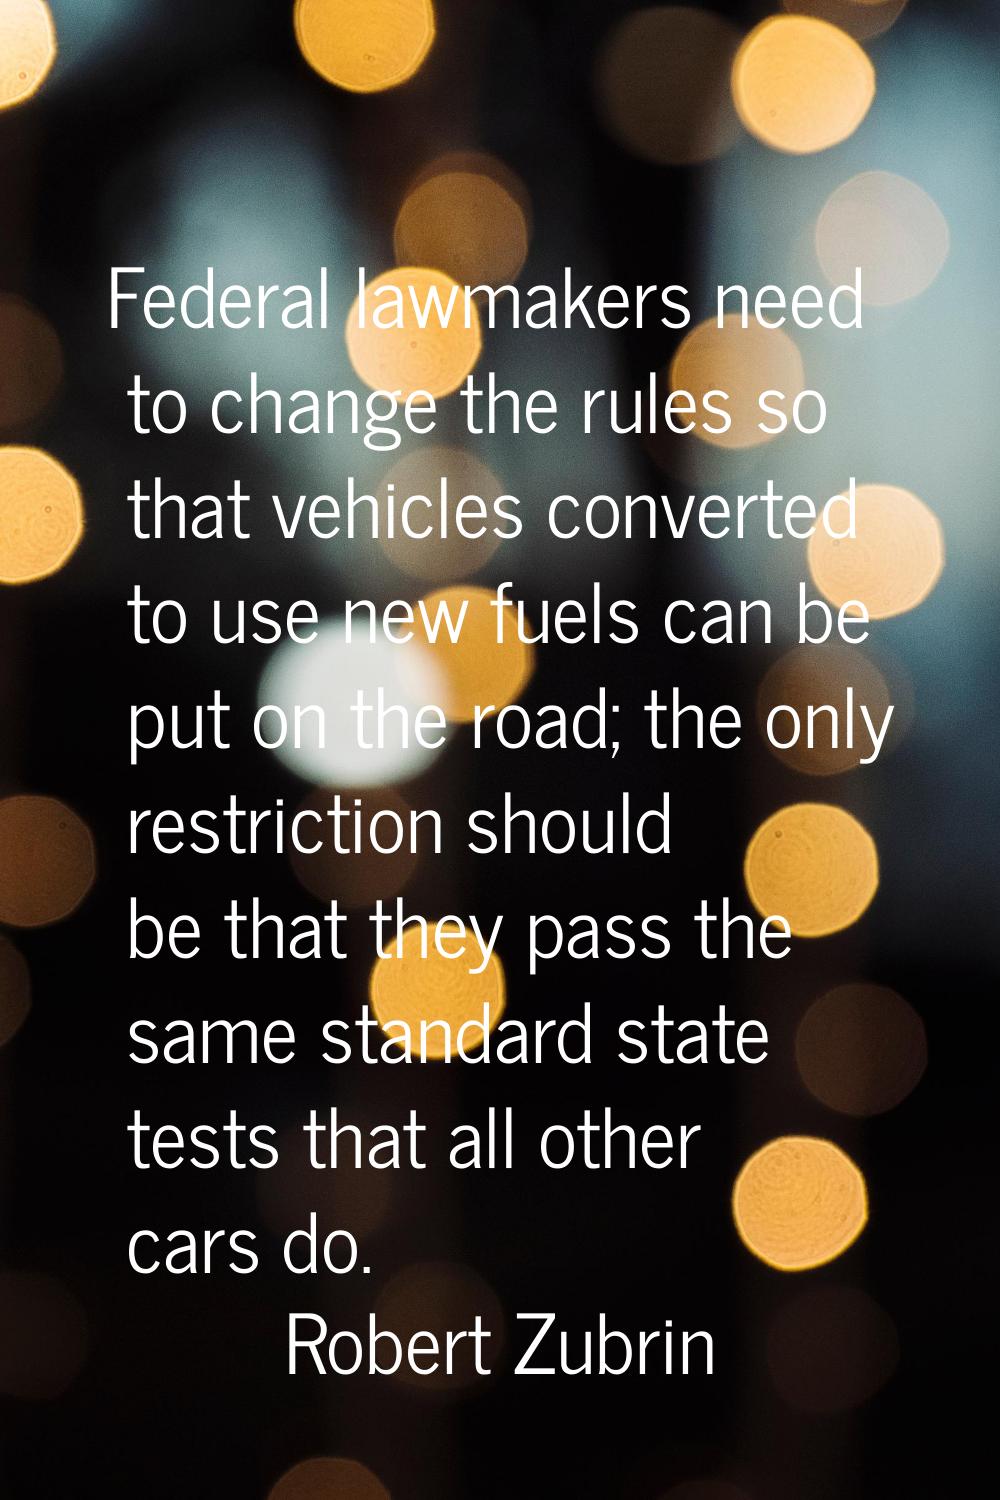 Federal lawmakers need to change the rules so that vehicles converted to use new fuels can be put o